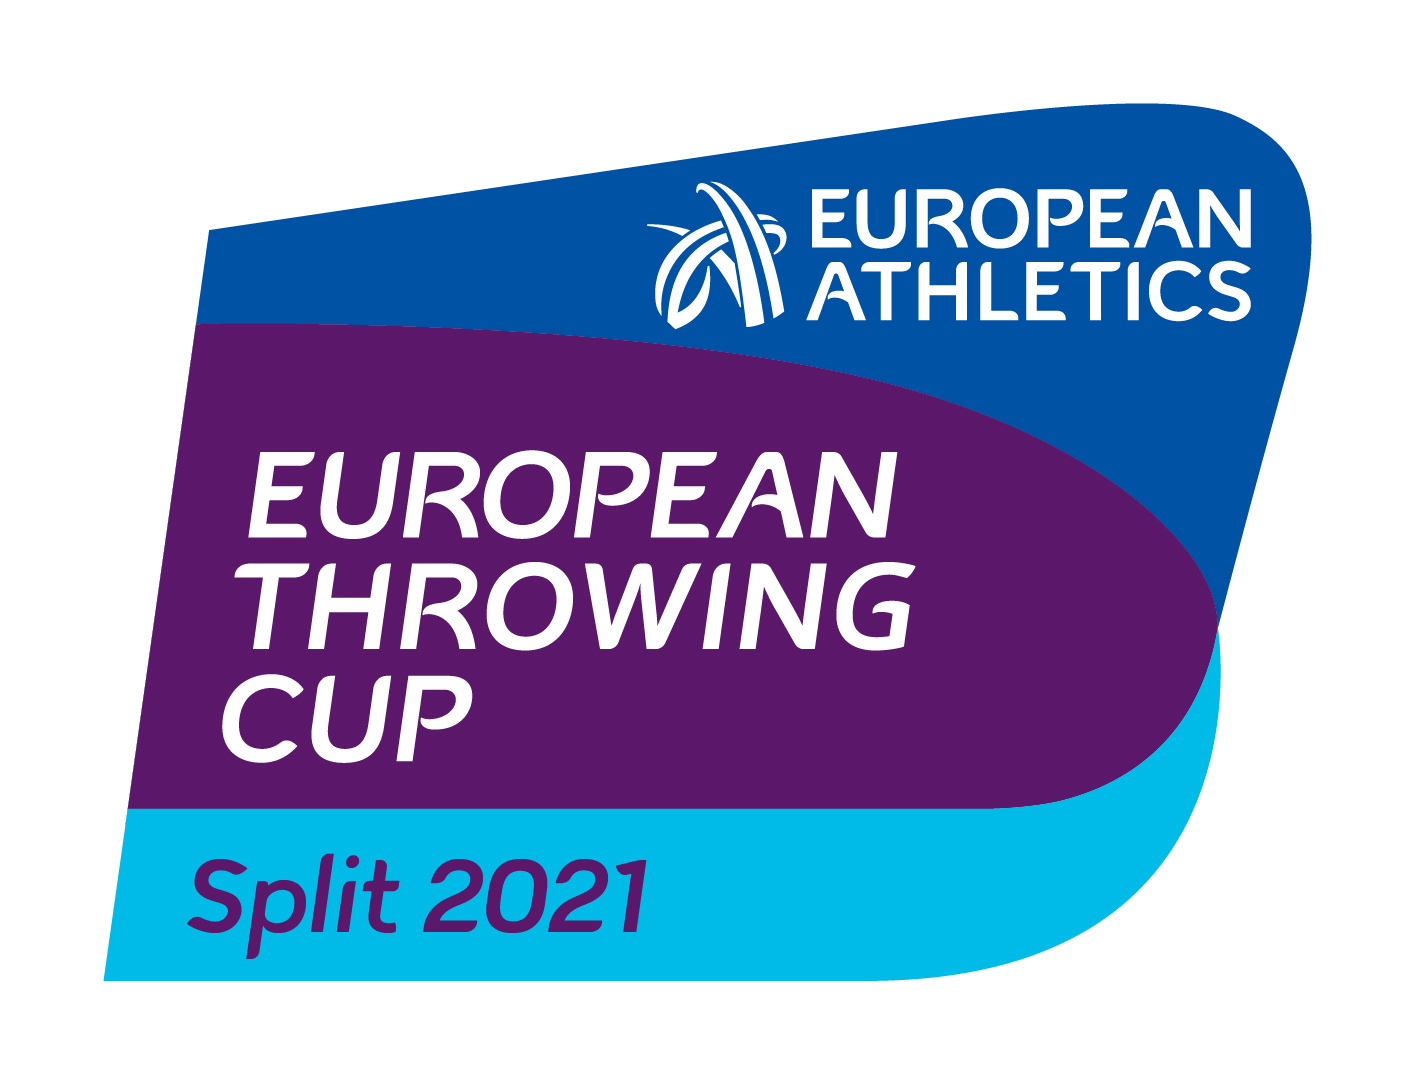 Tuthill stars at European Throwing Cup